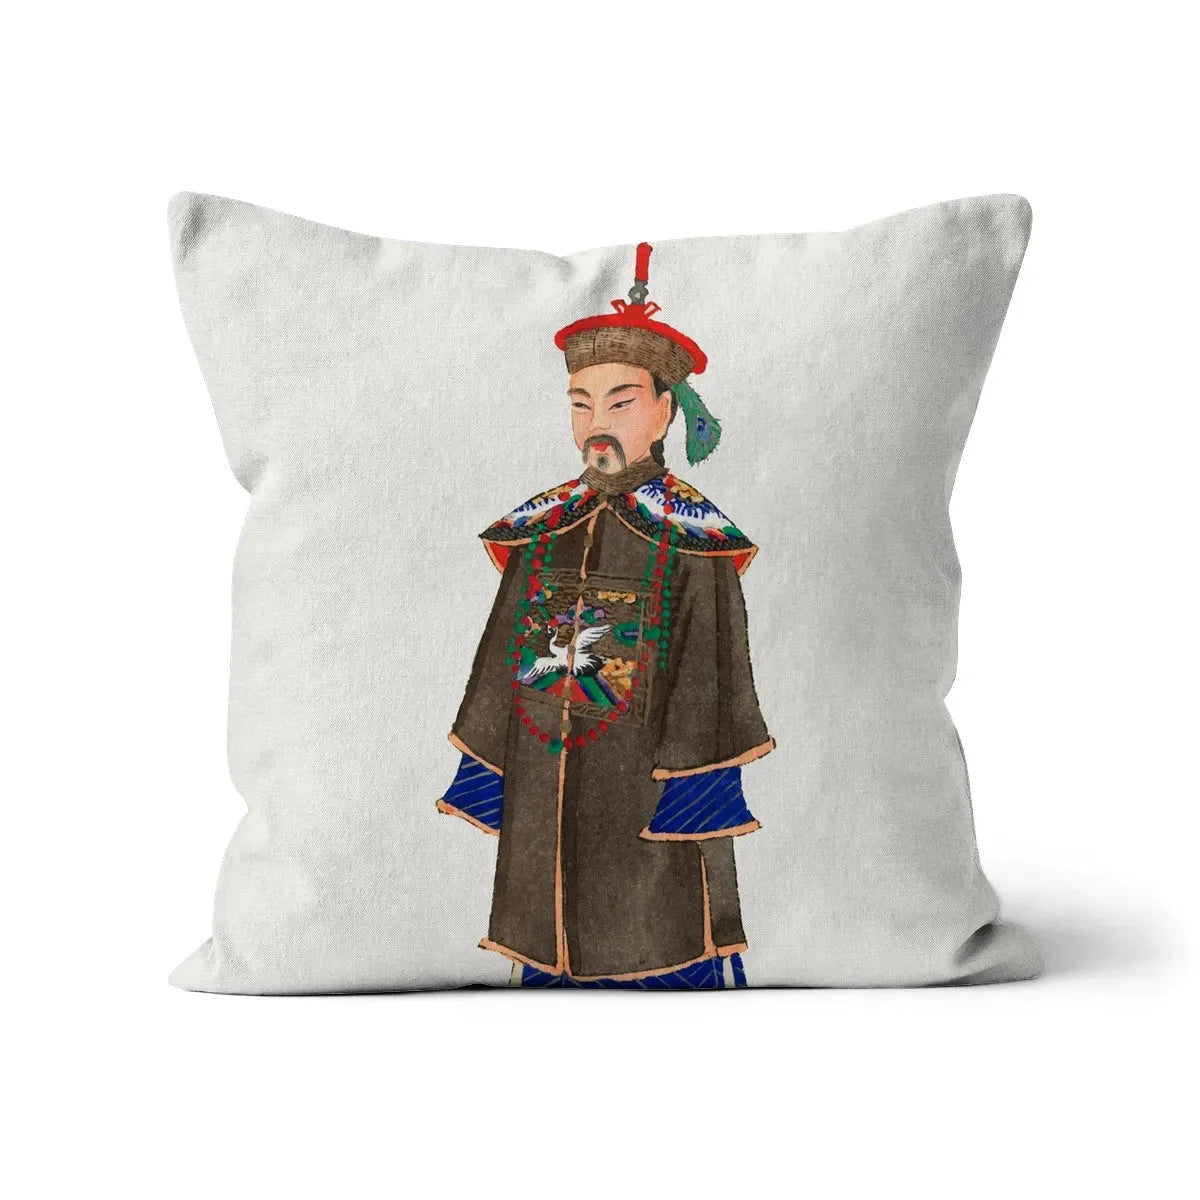 Chinese Nobleman At Court Cushion - Linen / 16’x16’ - Throw Pillows - Aesthetic Art